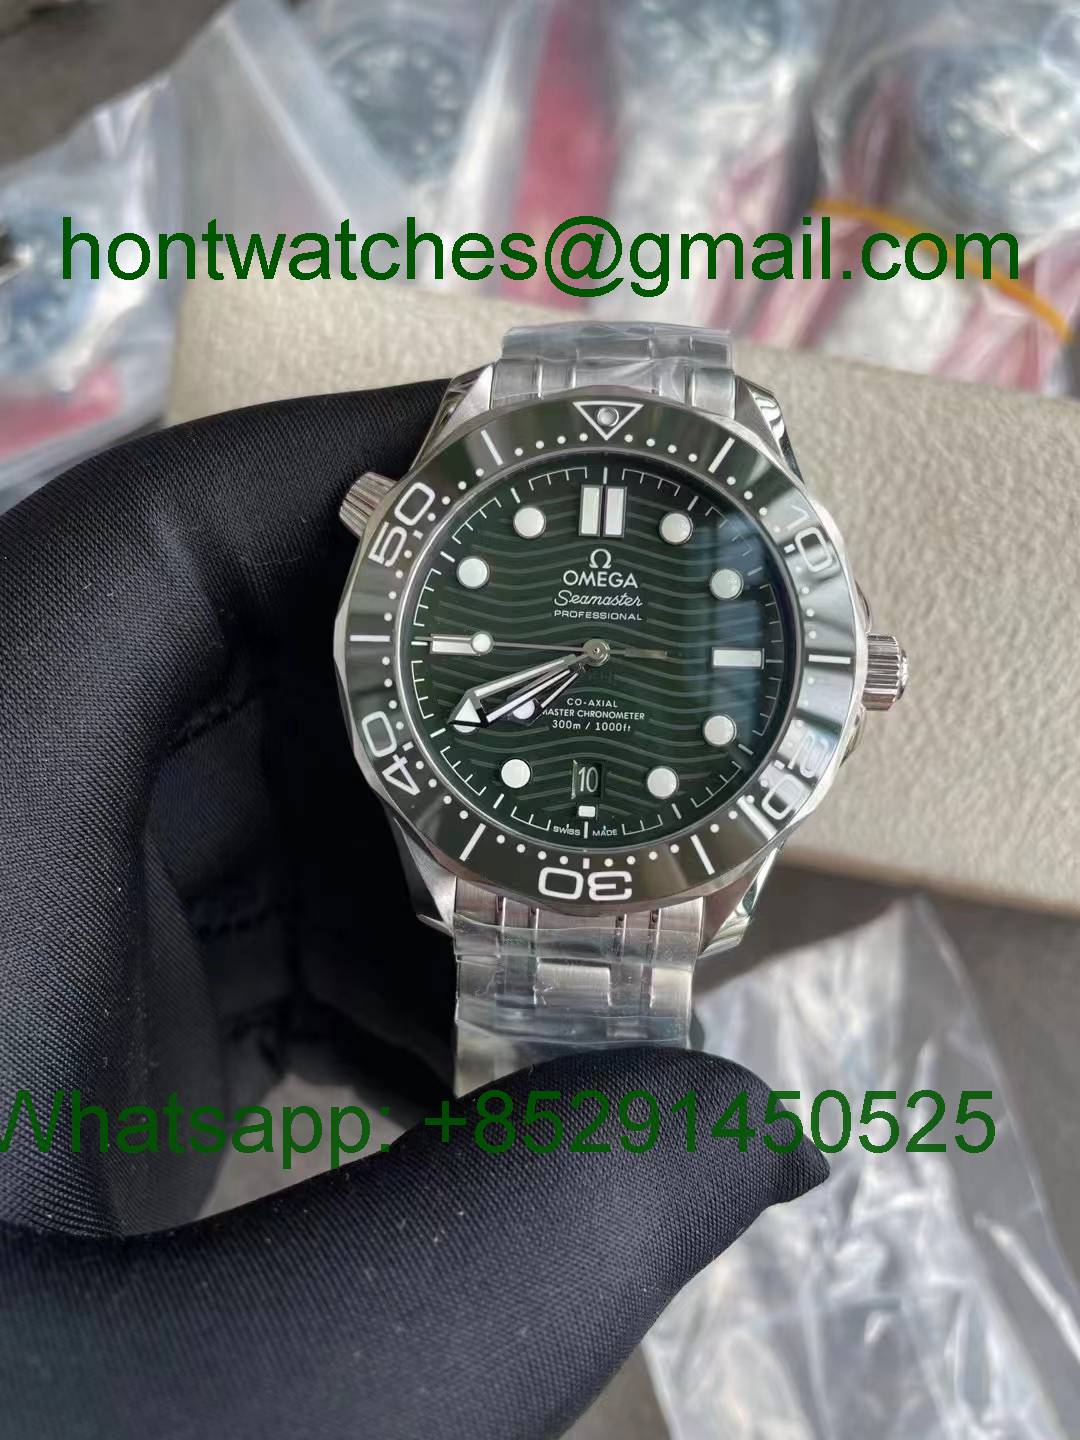 Replica OMEGA Seamaster 300m Green VSF SuperClone Hontwatch Wholesale